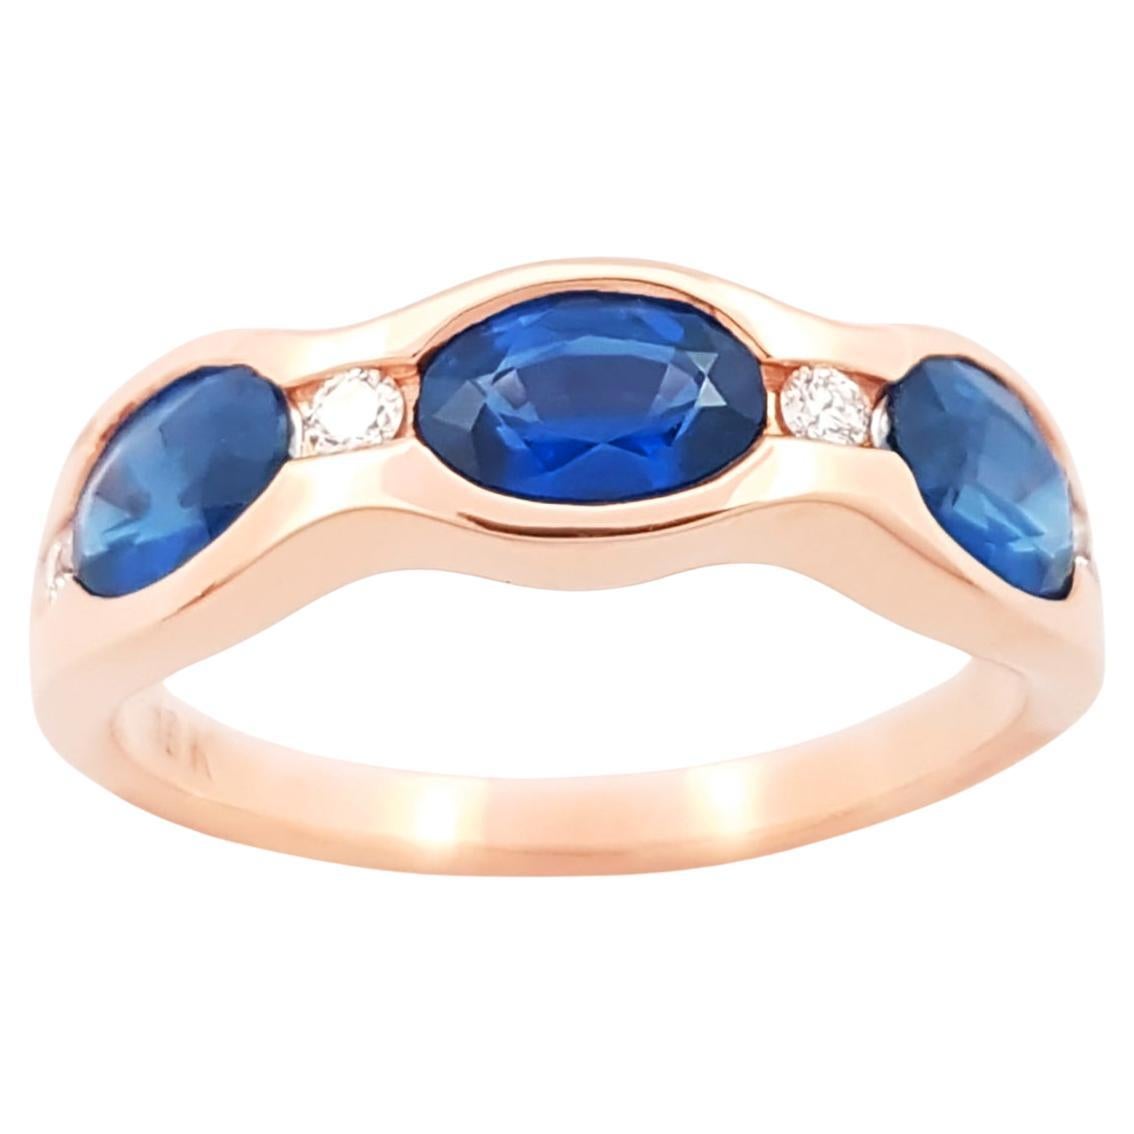 Blue Sapphire with Diamond Ring set in 18K Rose Gold Settings